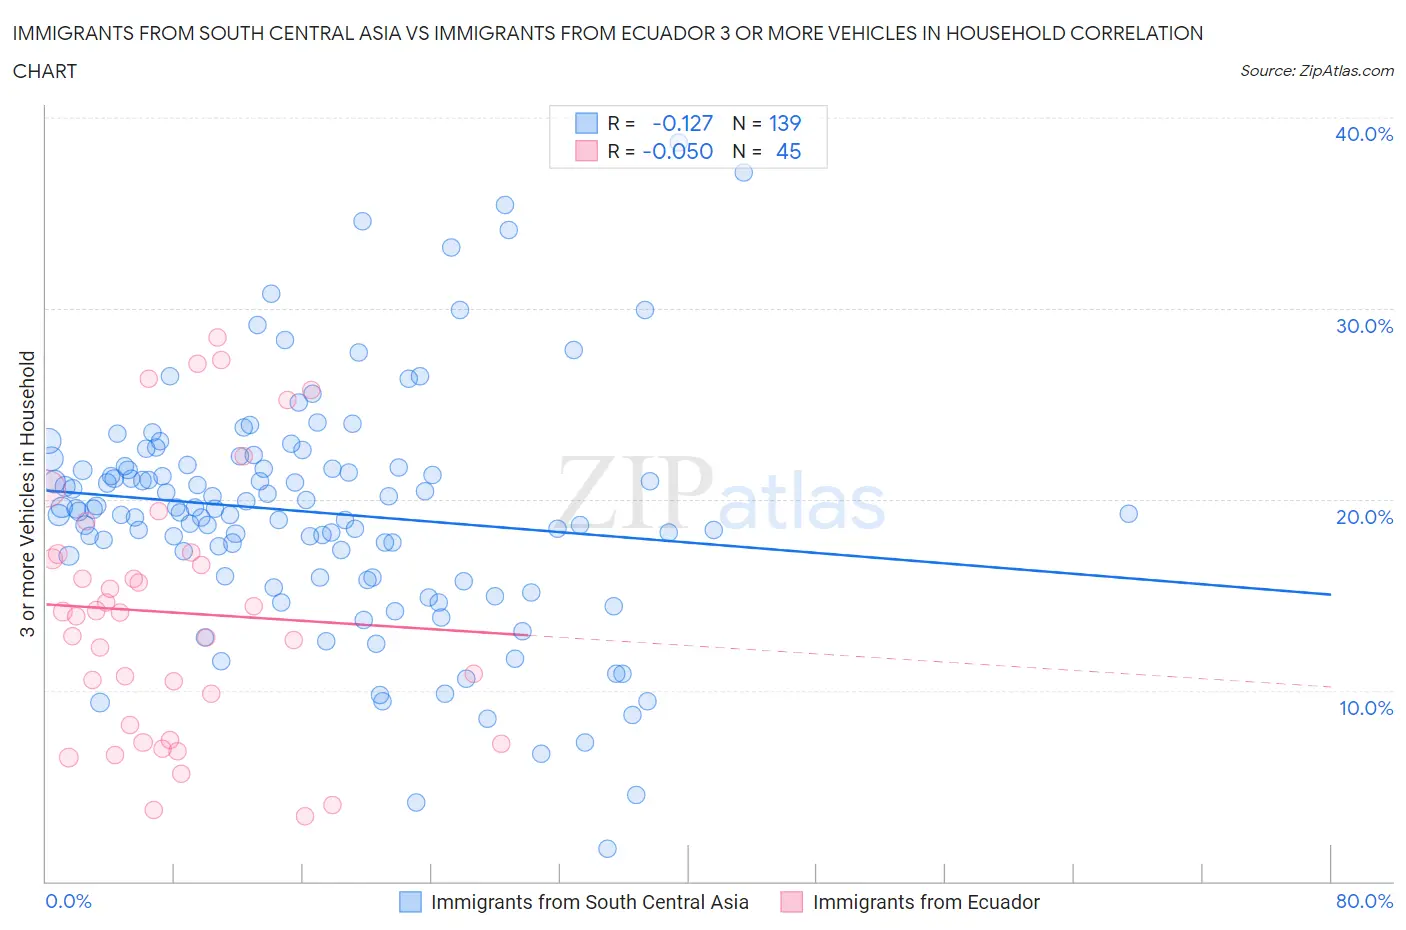 Immigrants from South Central Asia vs Immigrants from Ecuador 3 or more Vehicles in Household